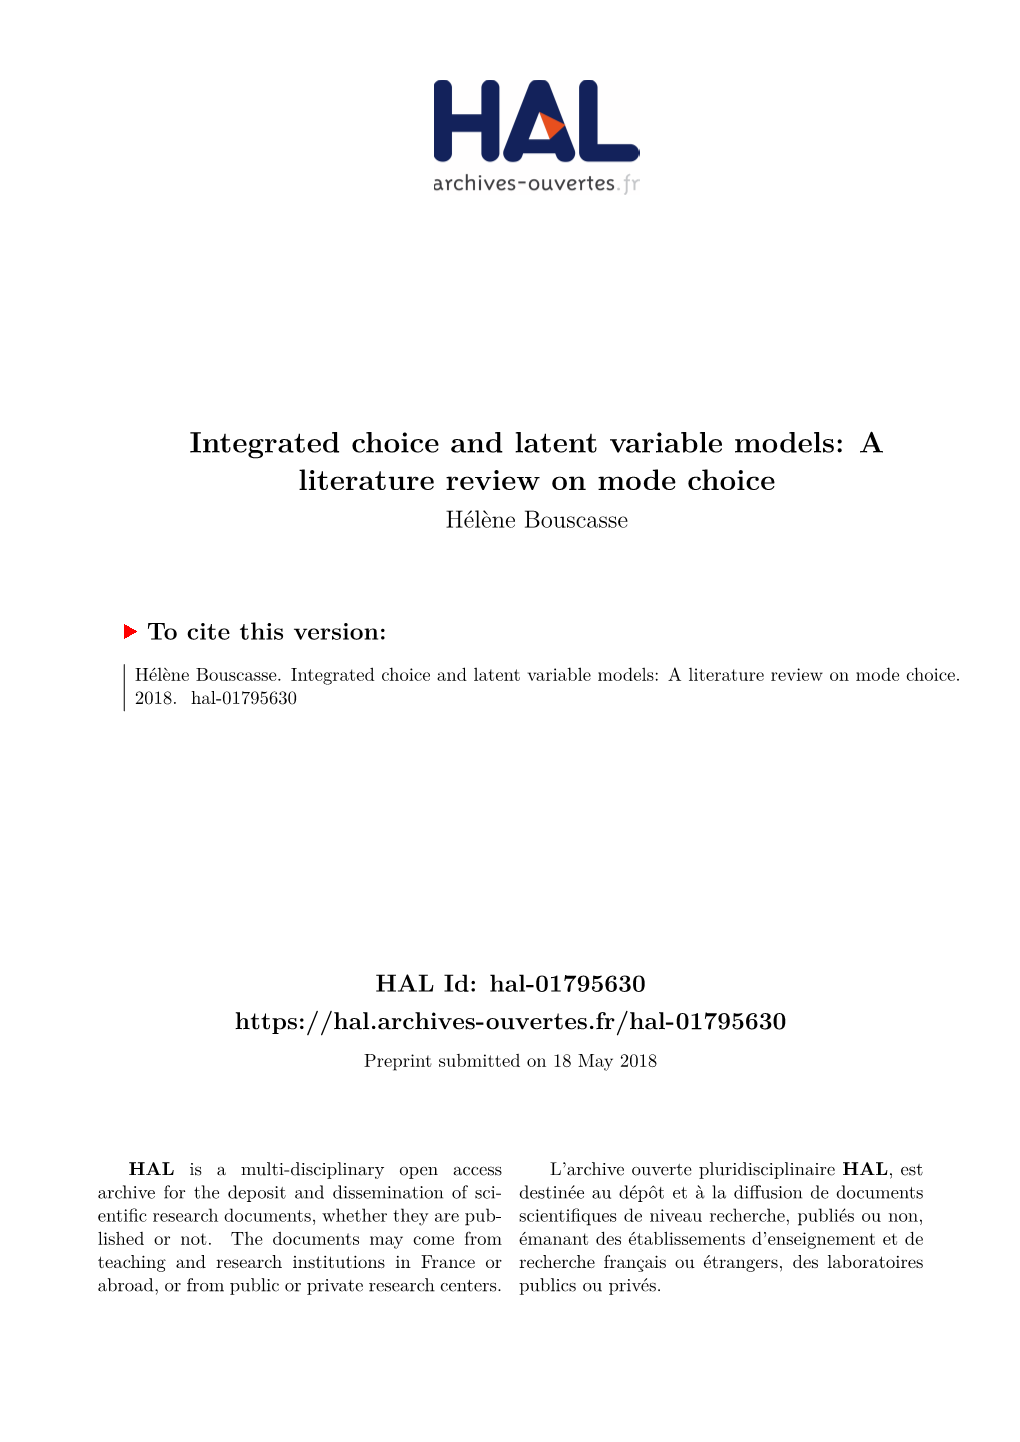 Integrated Choice and Latent Variable Models: a Literature Review on Mode Choice Hélène Bouscasse